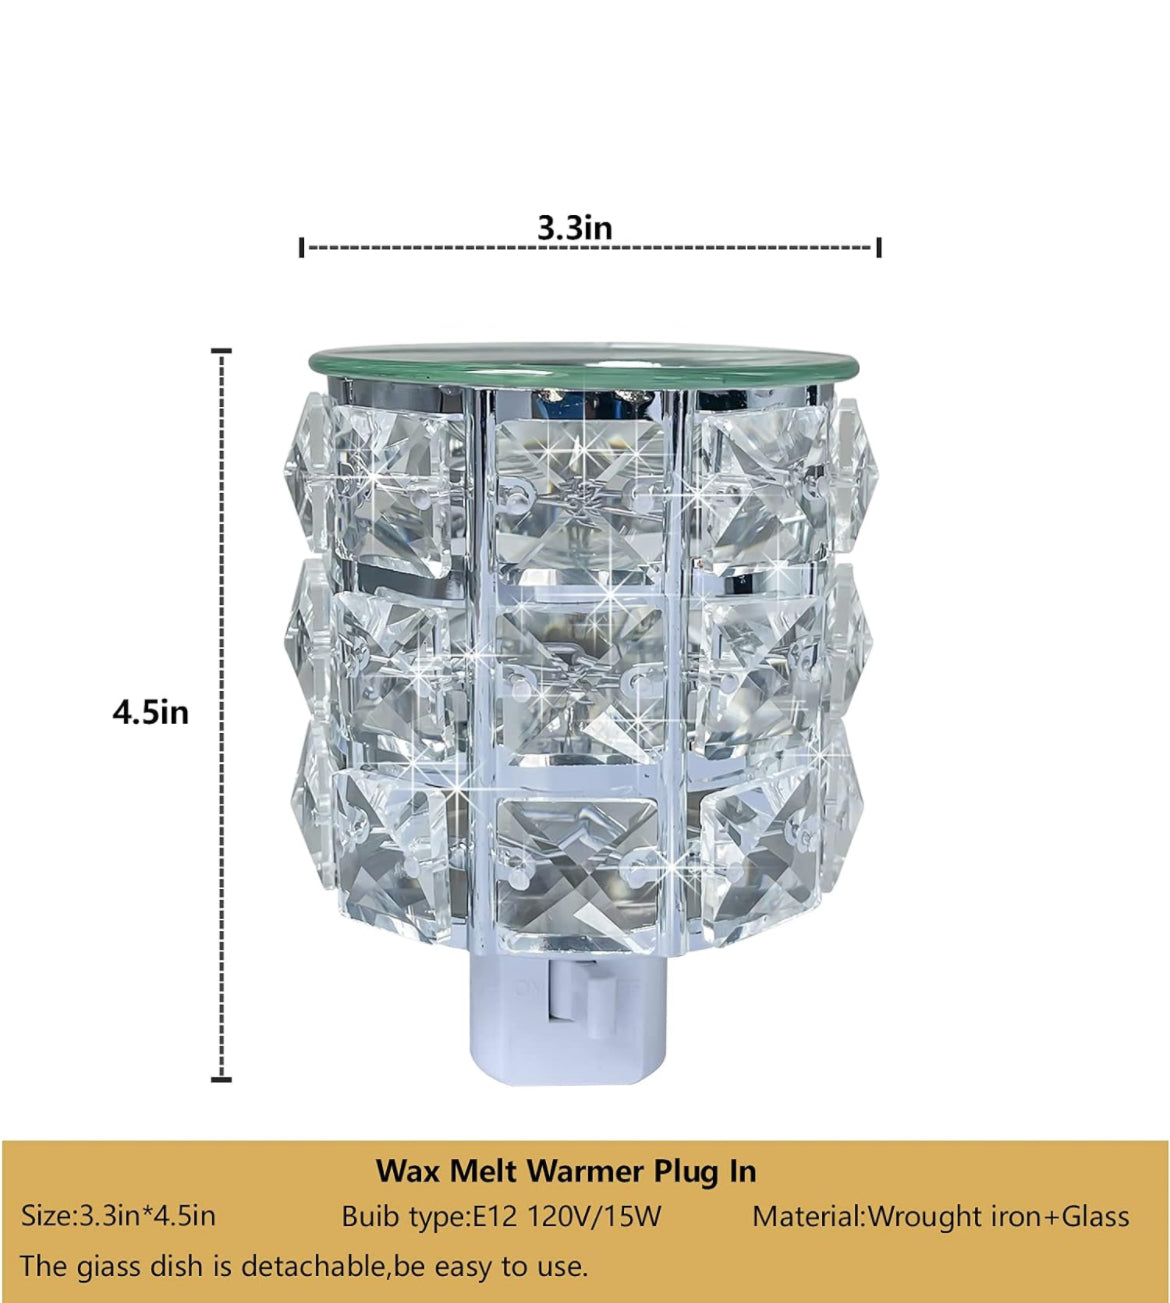 "CrystalGlow Plug-In Wax Melt Warmer: Illuminate Your Space with Fragrance"